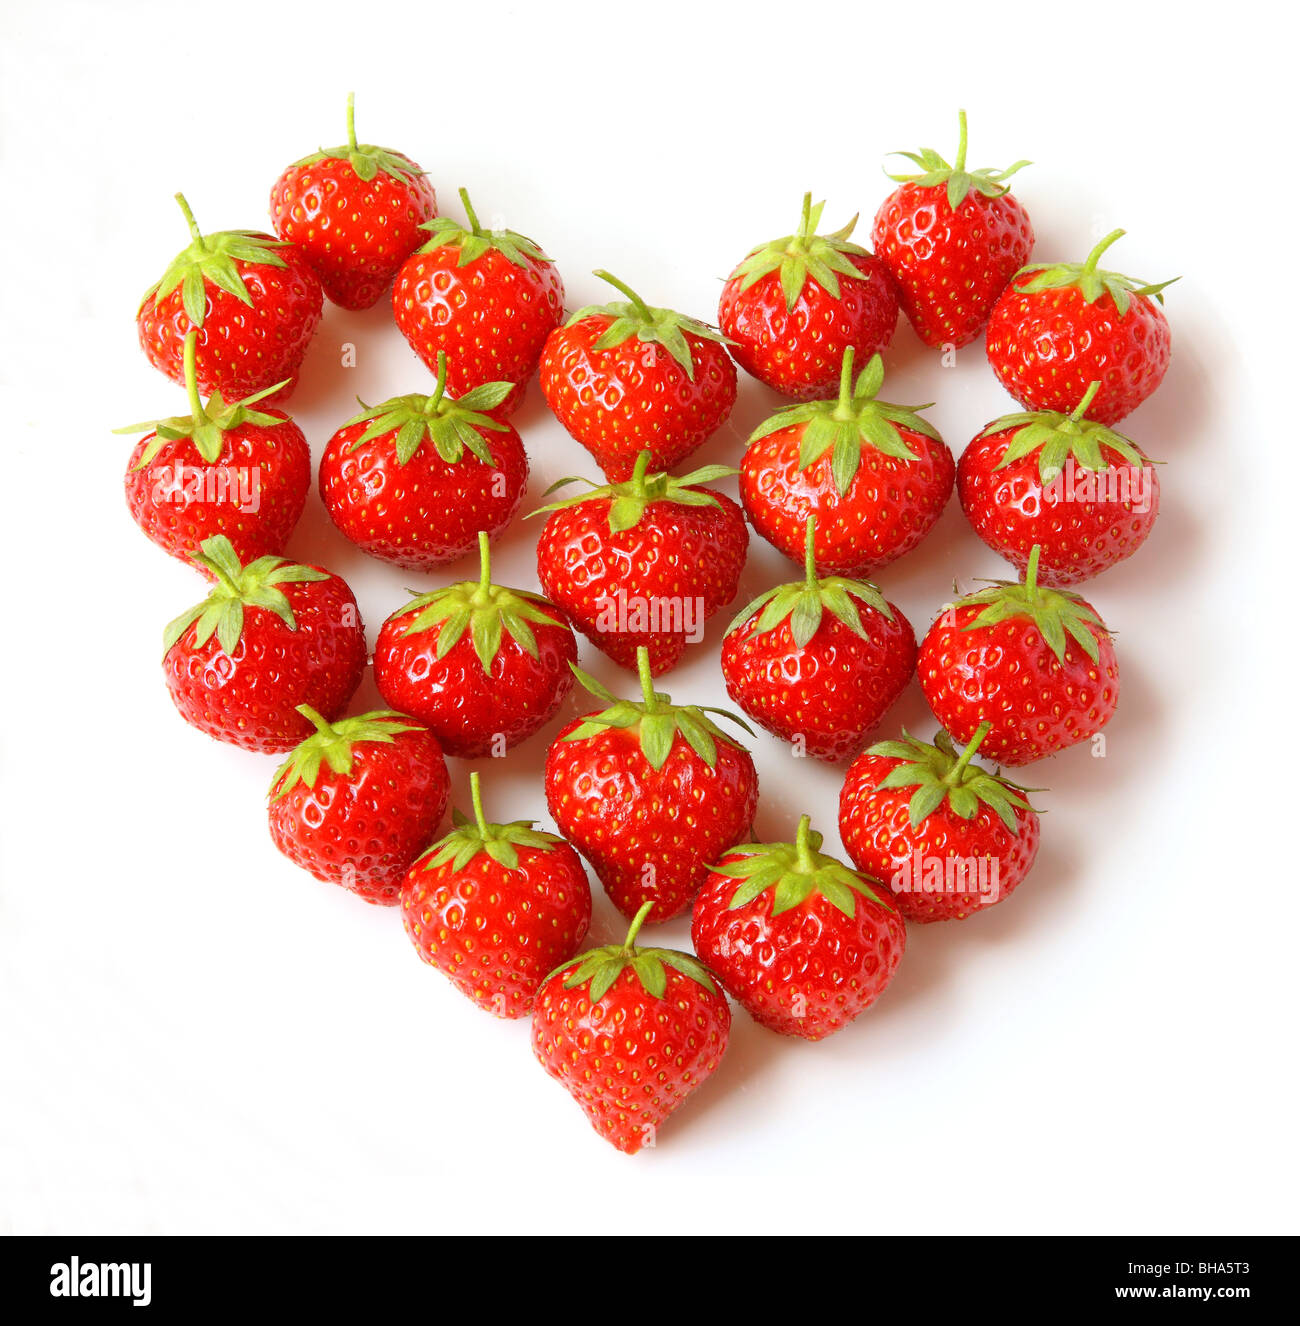 Fresh, ripe, organic strawberries placed to create a solid heart shape, on a white background. Stock Photo